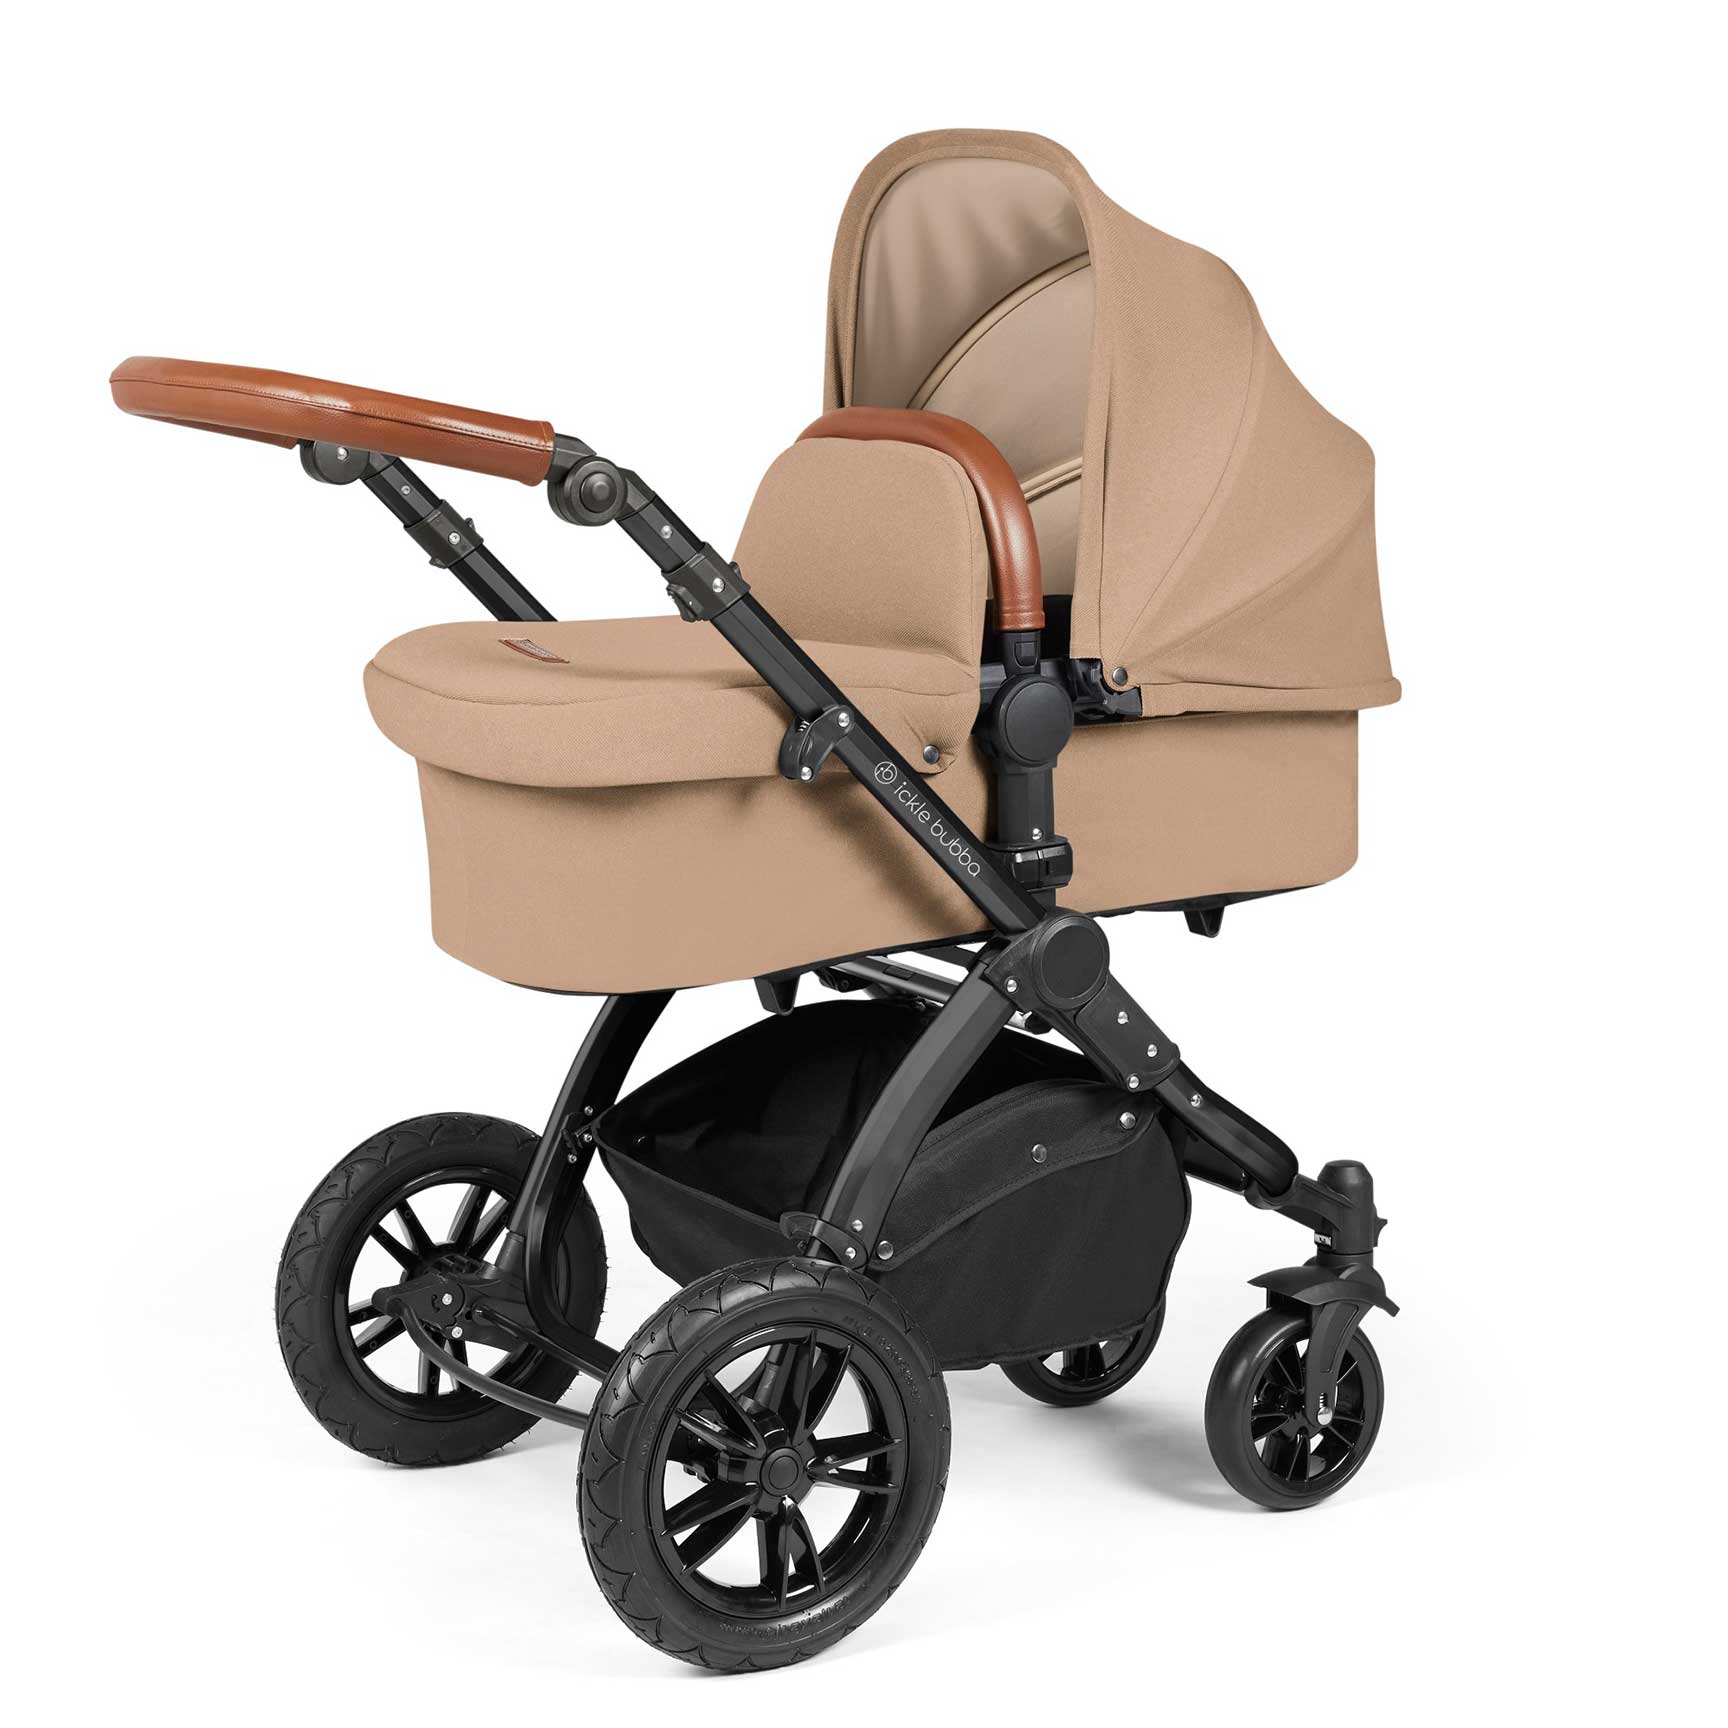 Ickle Bubba travel systems Ickle Bubba Stomp Luxe 2 in 1 Plus Pushchair & Carrycot - Black/Desert/Tan 10-003-001-209